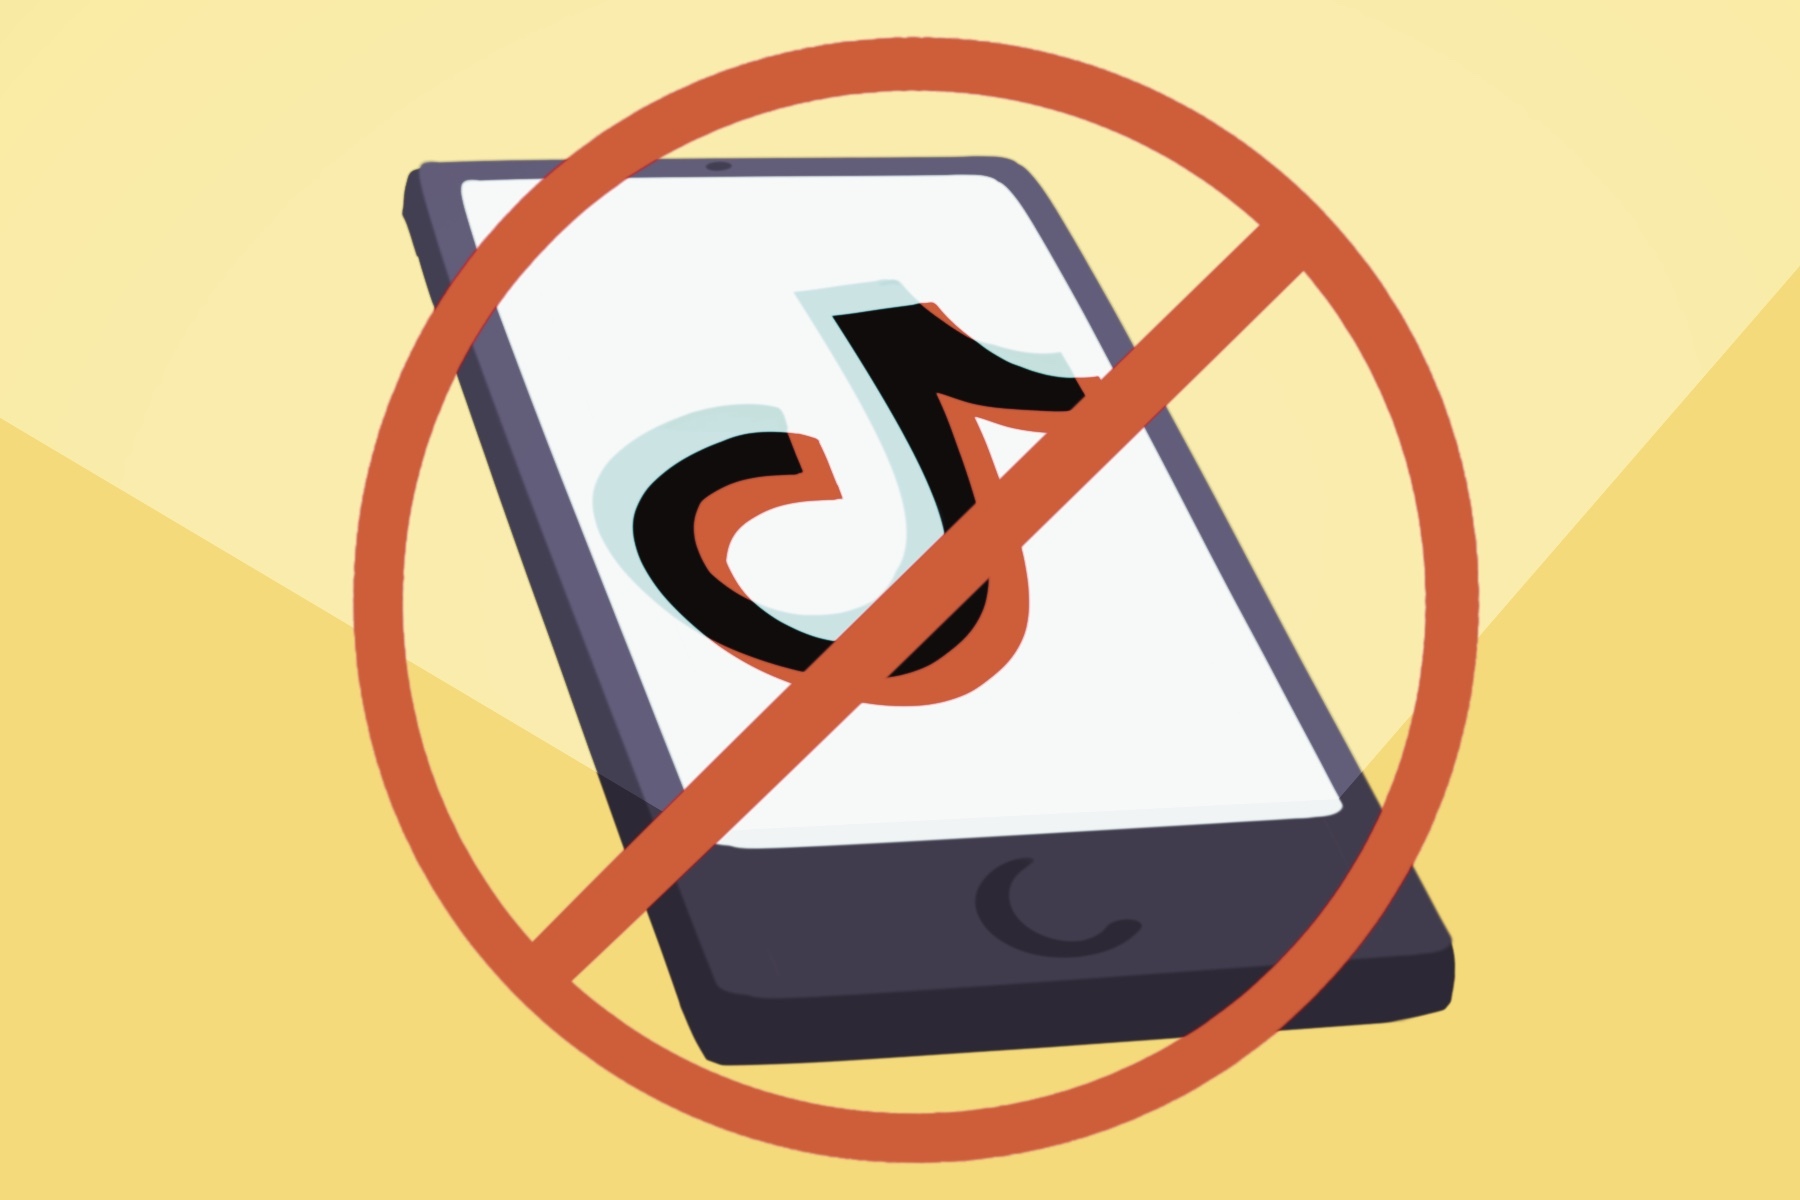 A phone with the TikTok app symbol on it, overlaid with a "no" sign